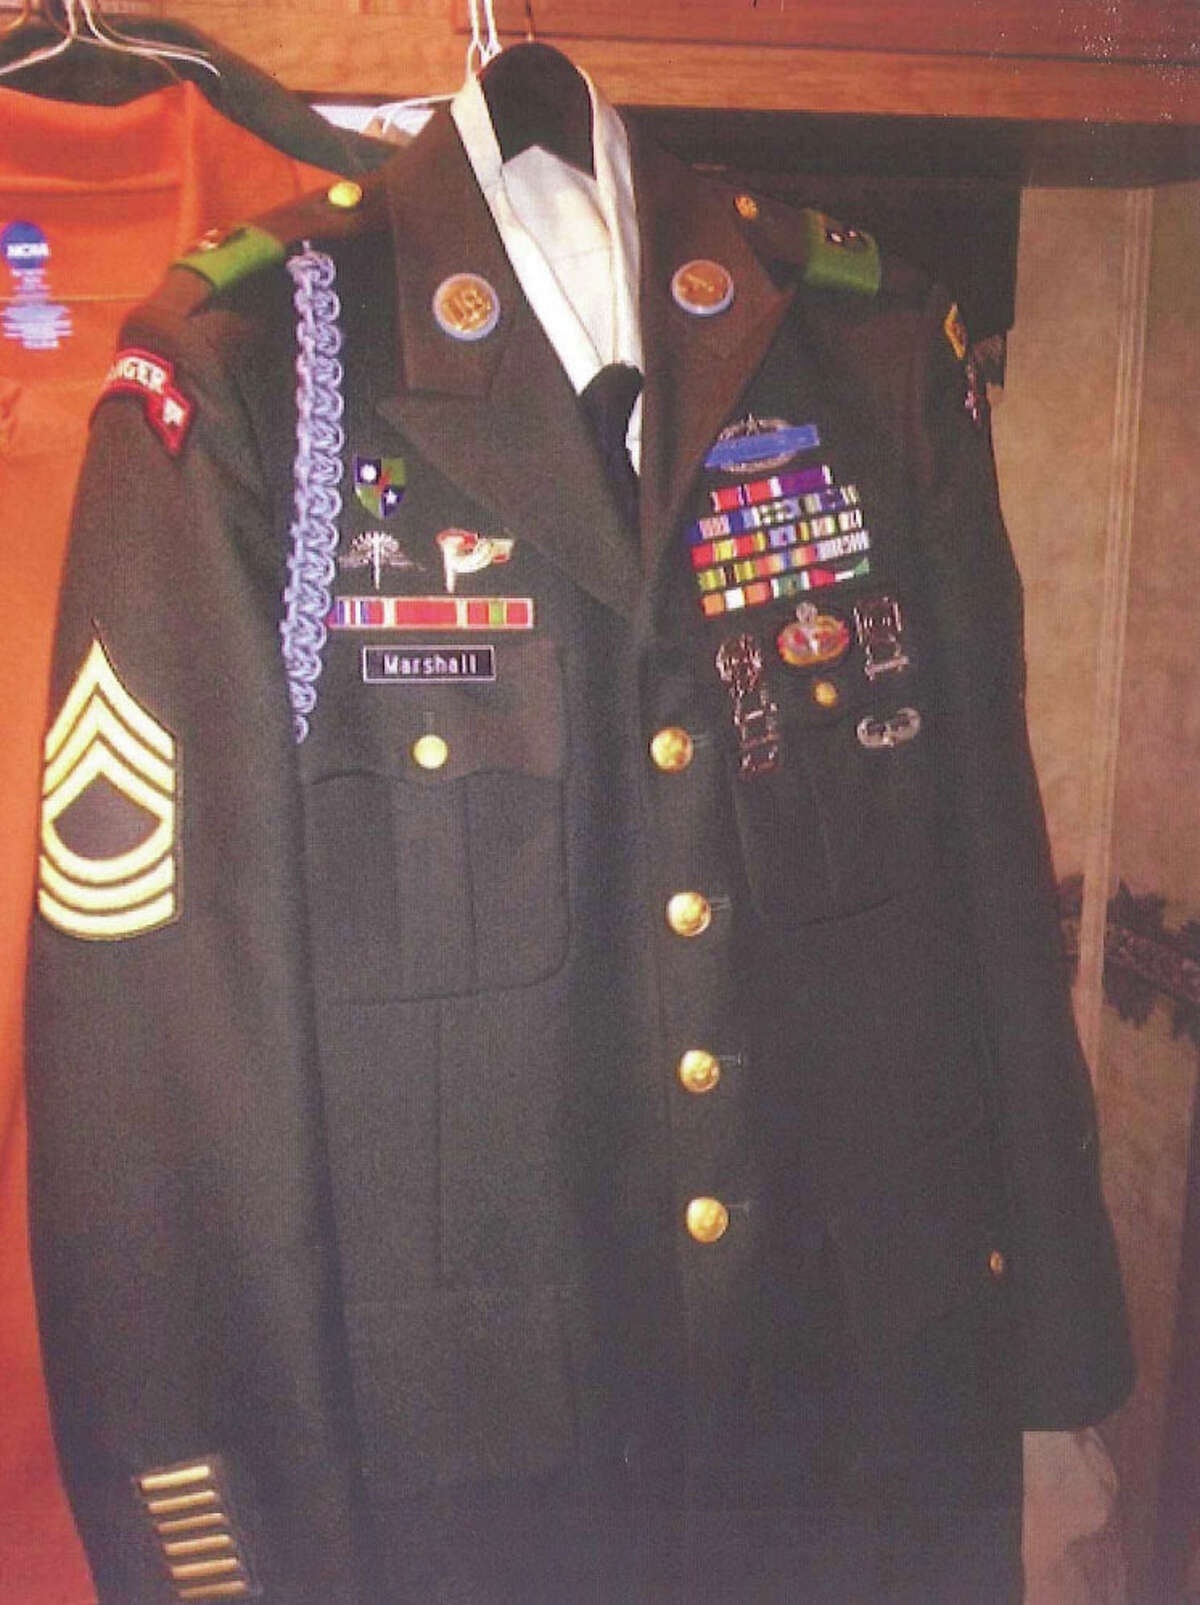 Photo of a uniform allegedly used by Daniel Lee Marshall, Jr. to portray himself as an Army Ranger, entered into evidence in a bond hearing held in the U.S. District Court in the Southern District of Texas on April 17.